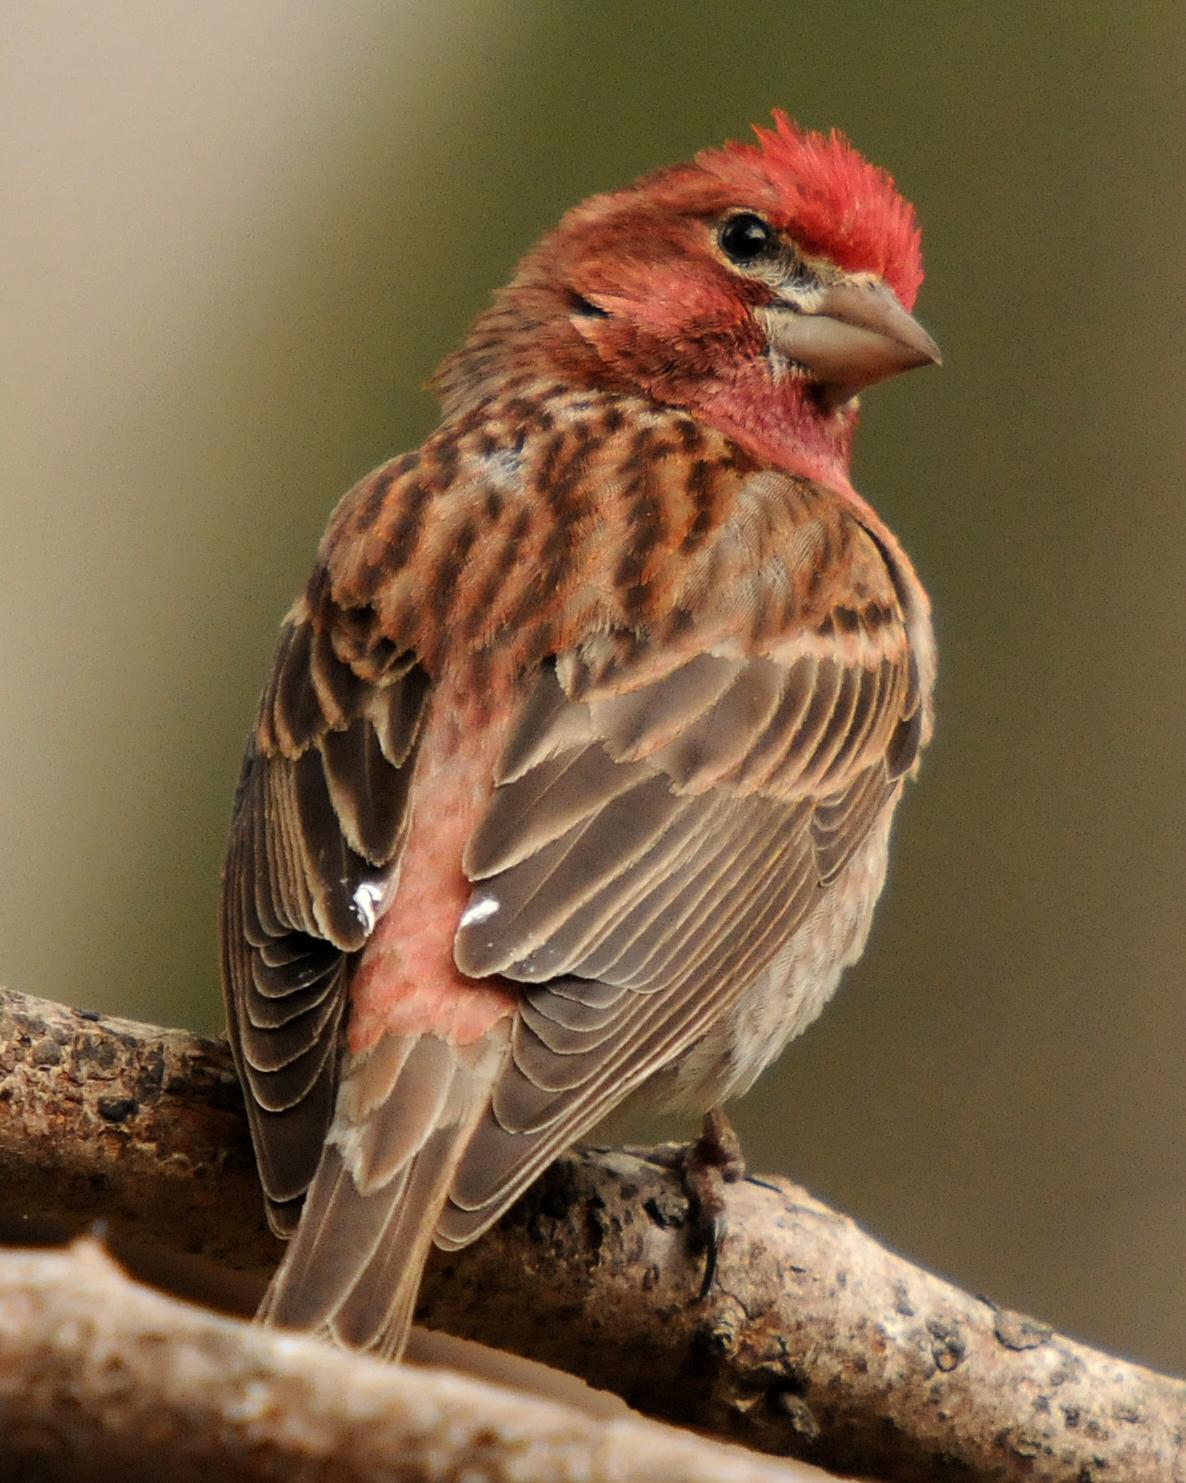 Cassin's Finch Photo by BECKY_WYLIE